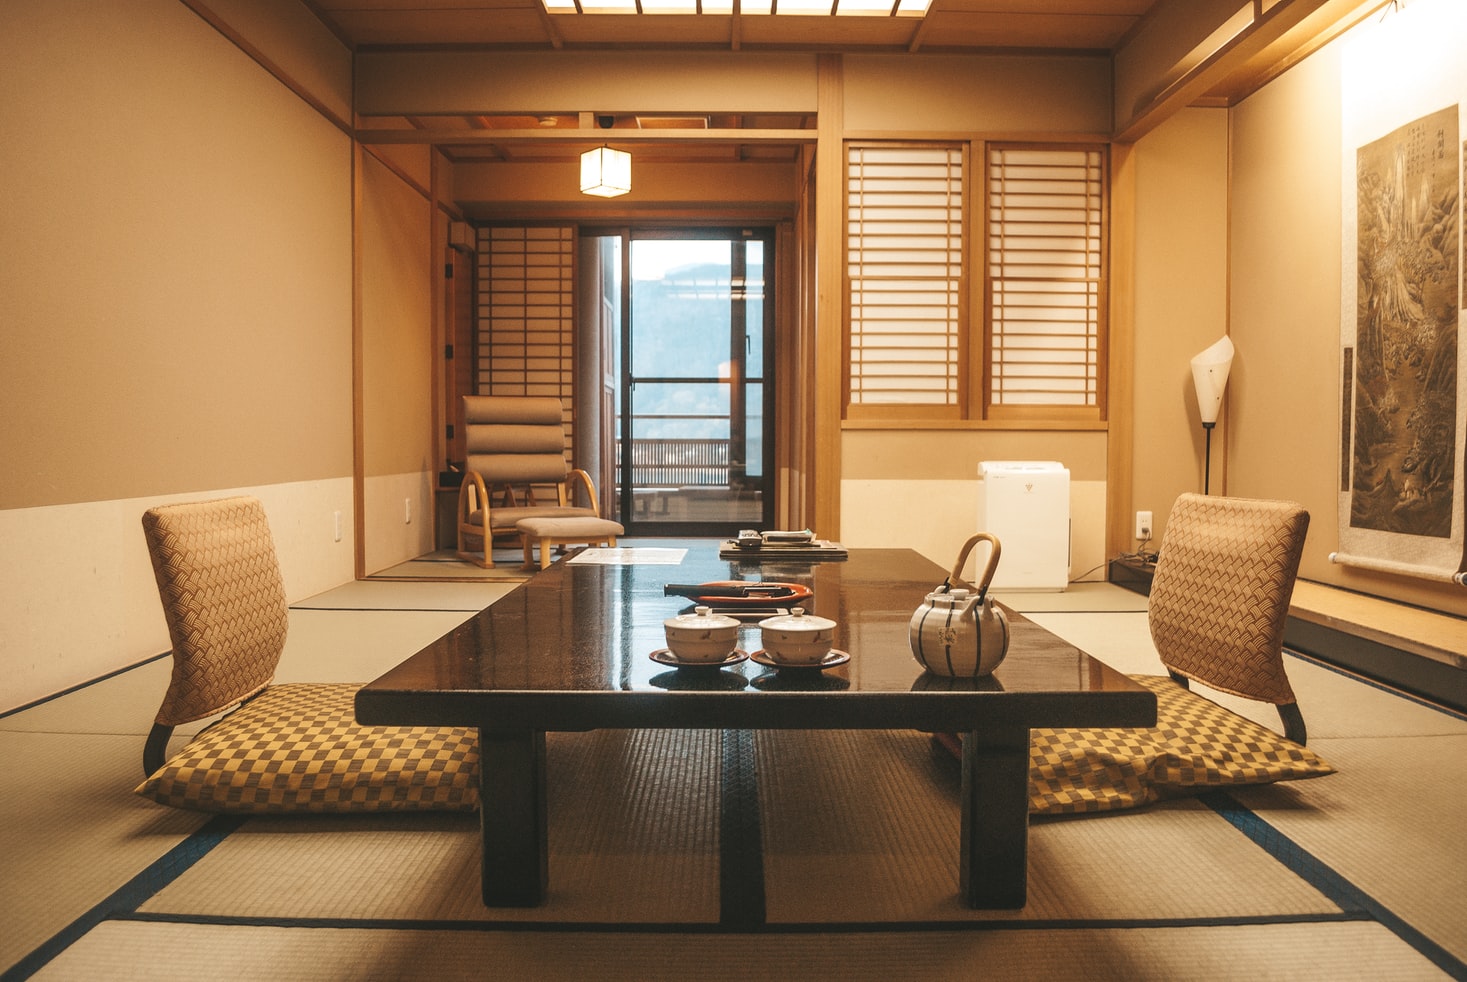 Bringing Minimalistic Sophistication to Home with Japanese Interior Ideas